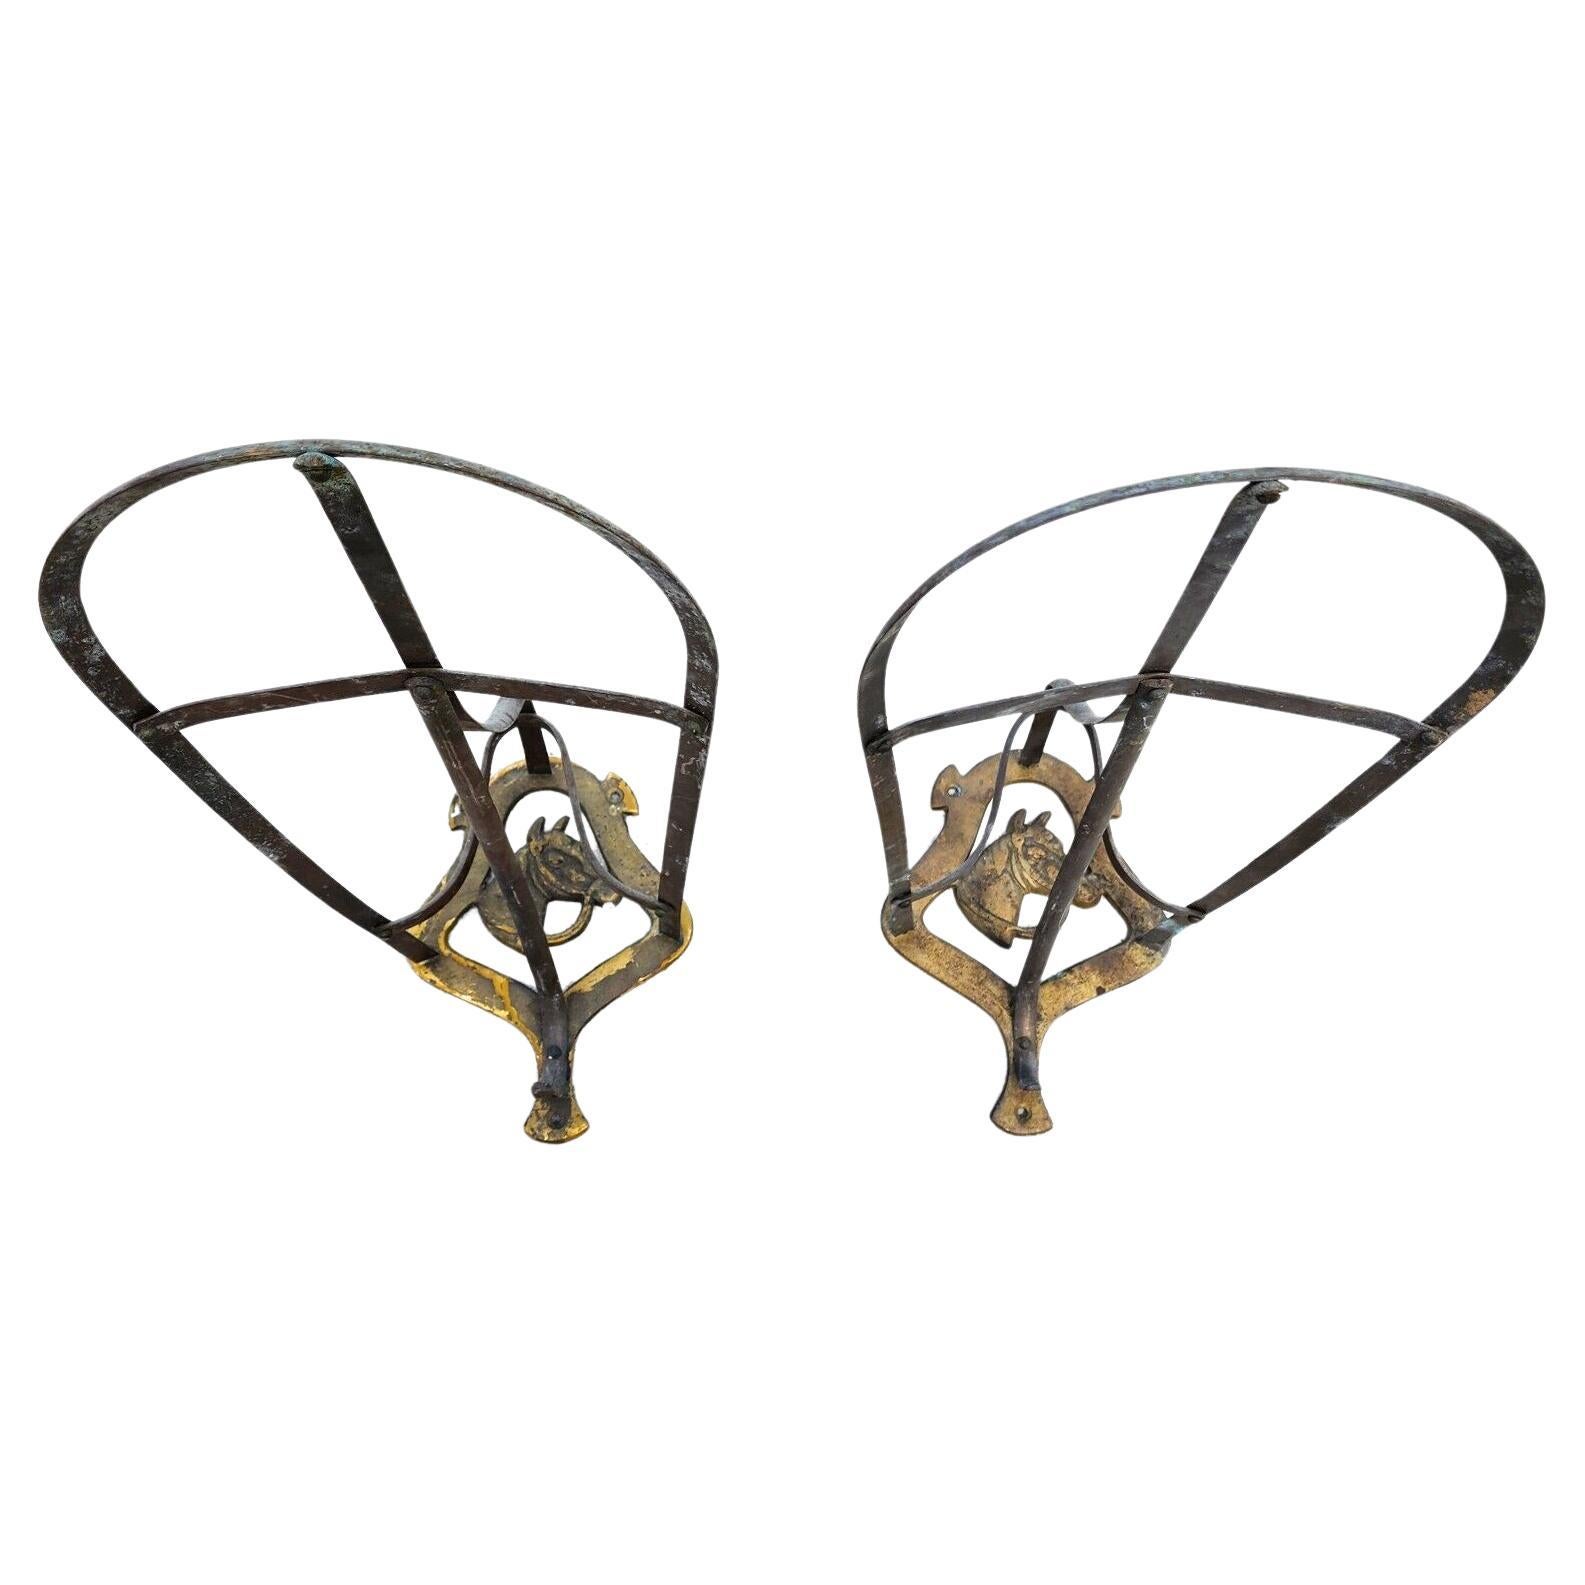 English Horse Saddle Wall Rack Solid Brass Vintage Pair For Sale